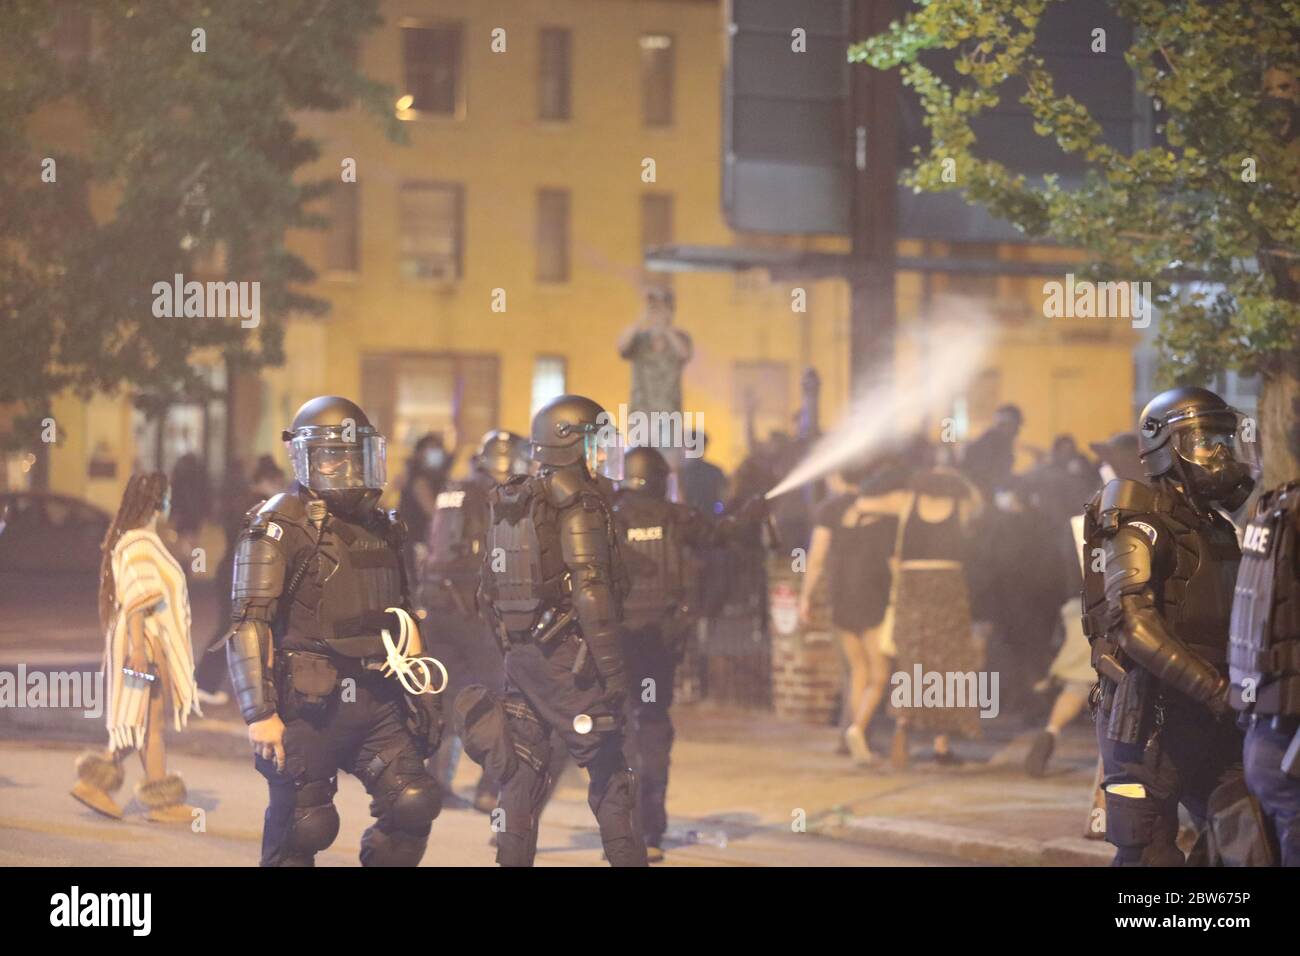 Riot police protesters usa hi-res stock photography and images picture